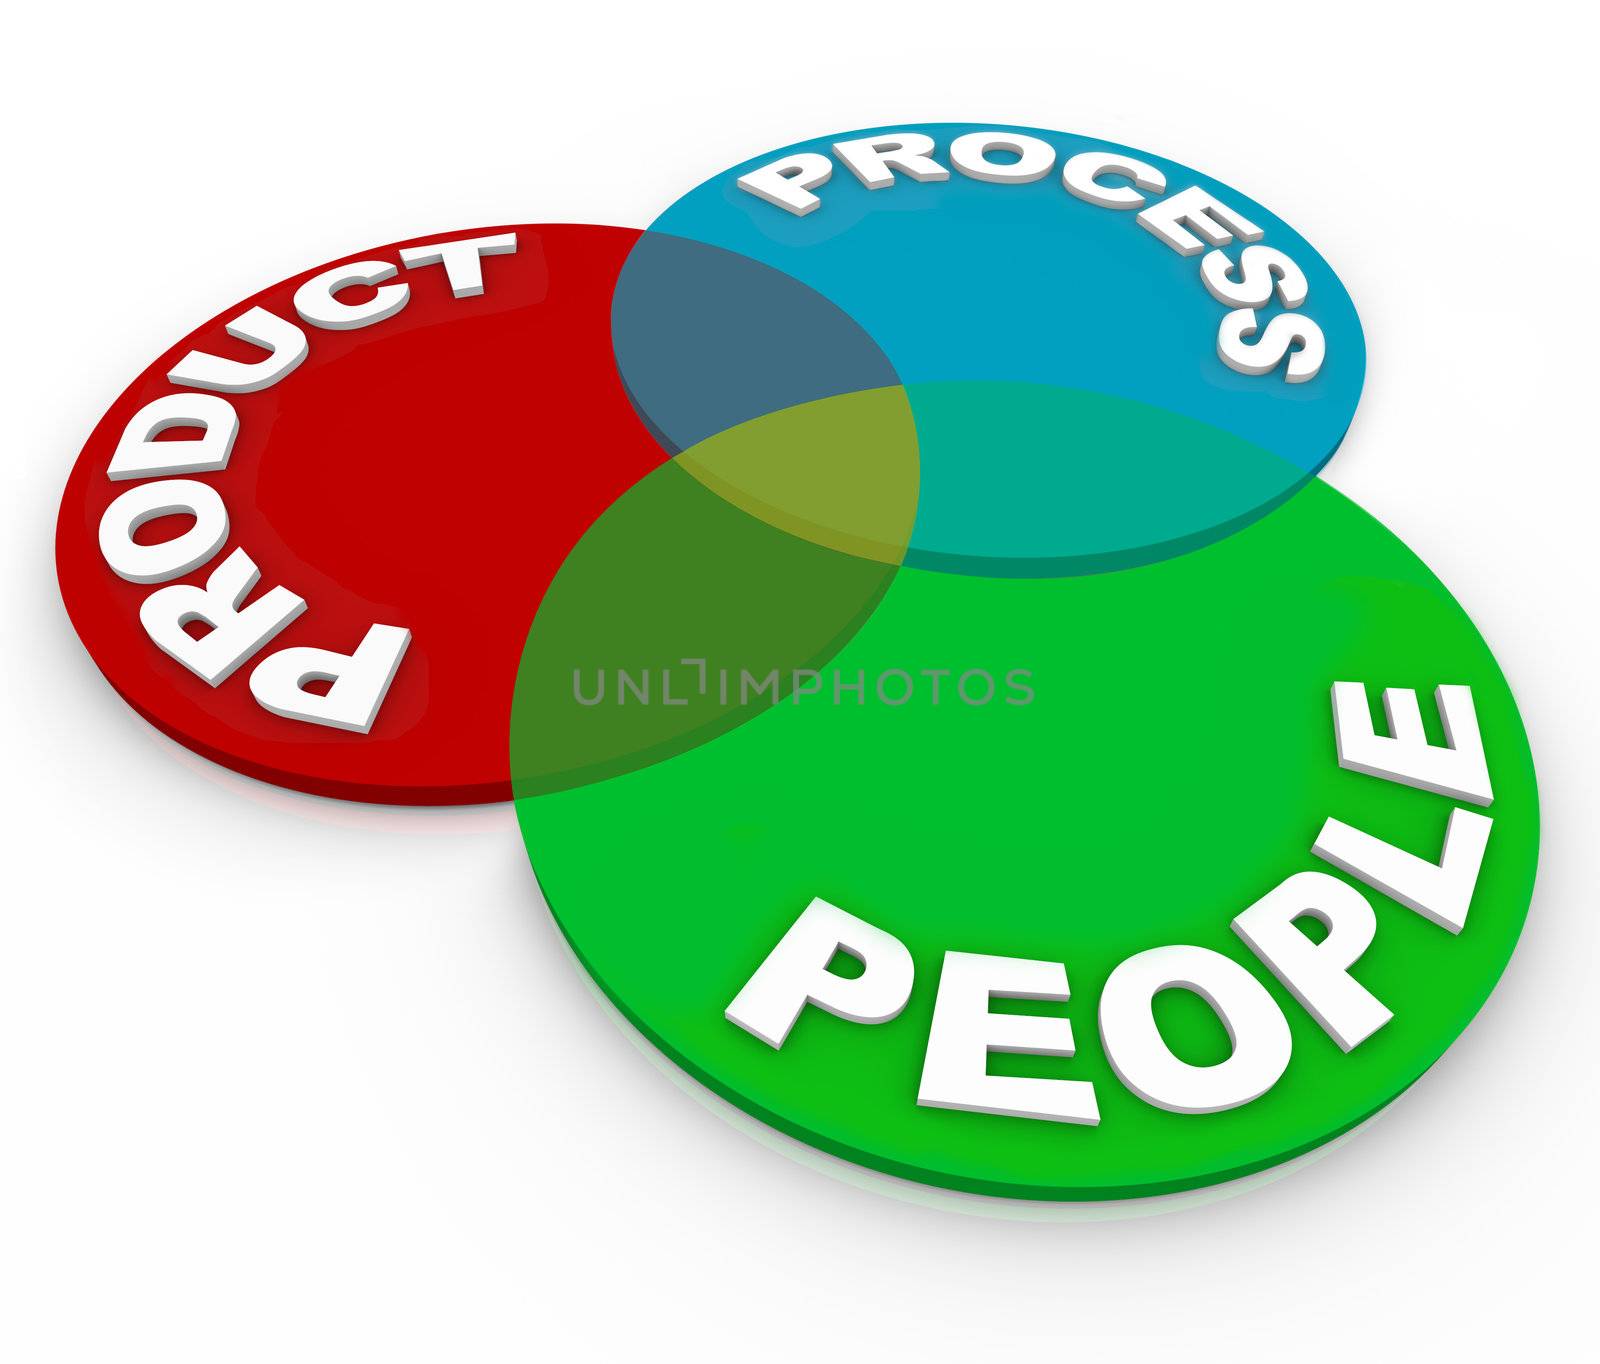 Product Lifecycle Planning Venn Diagram - People, Process by iQoncept